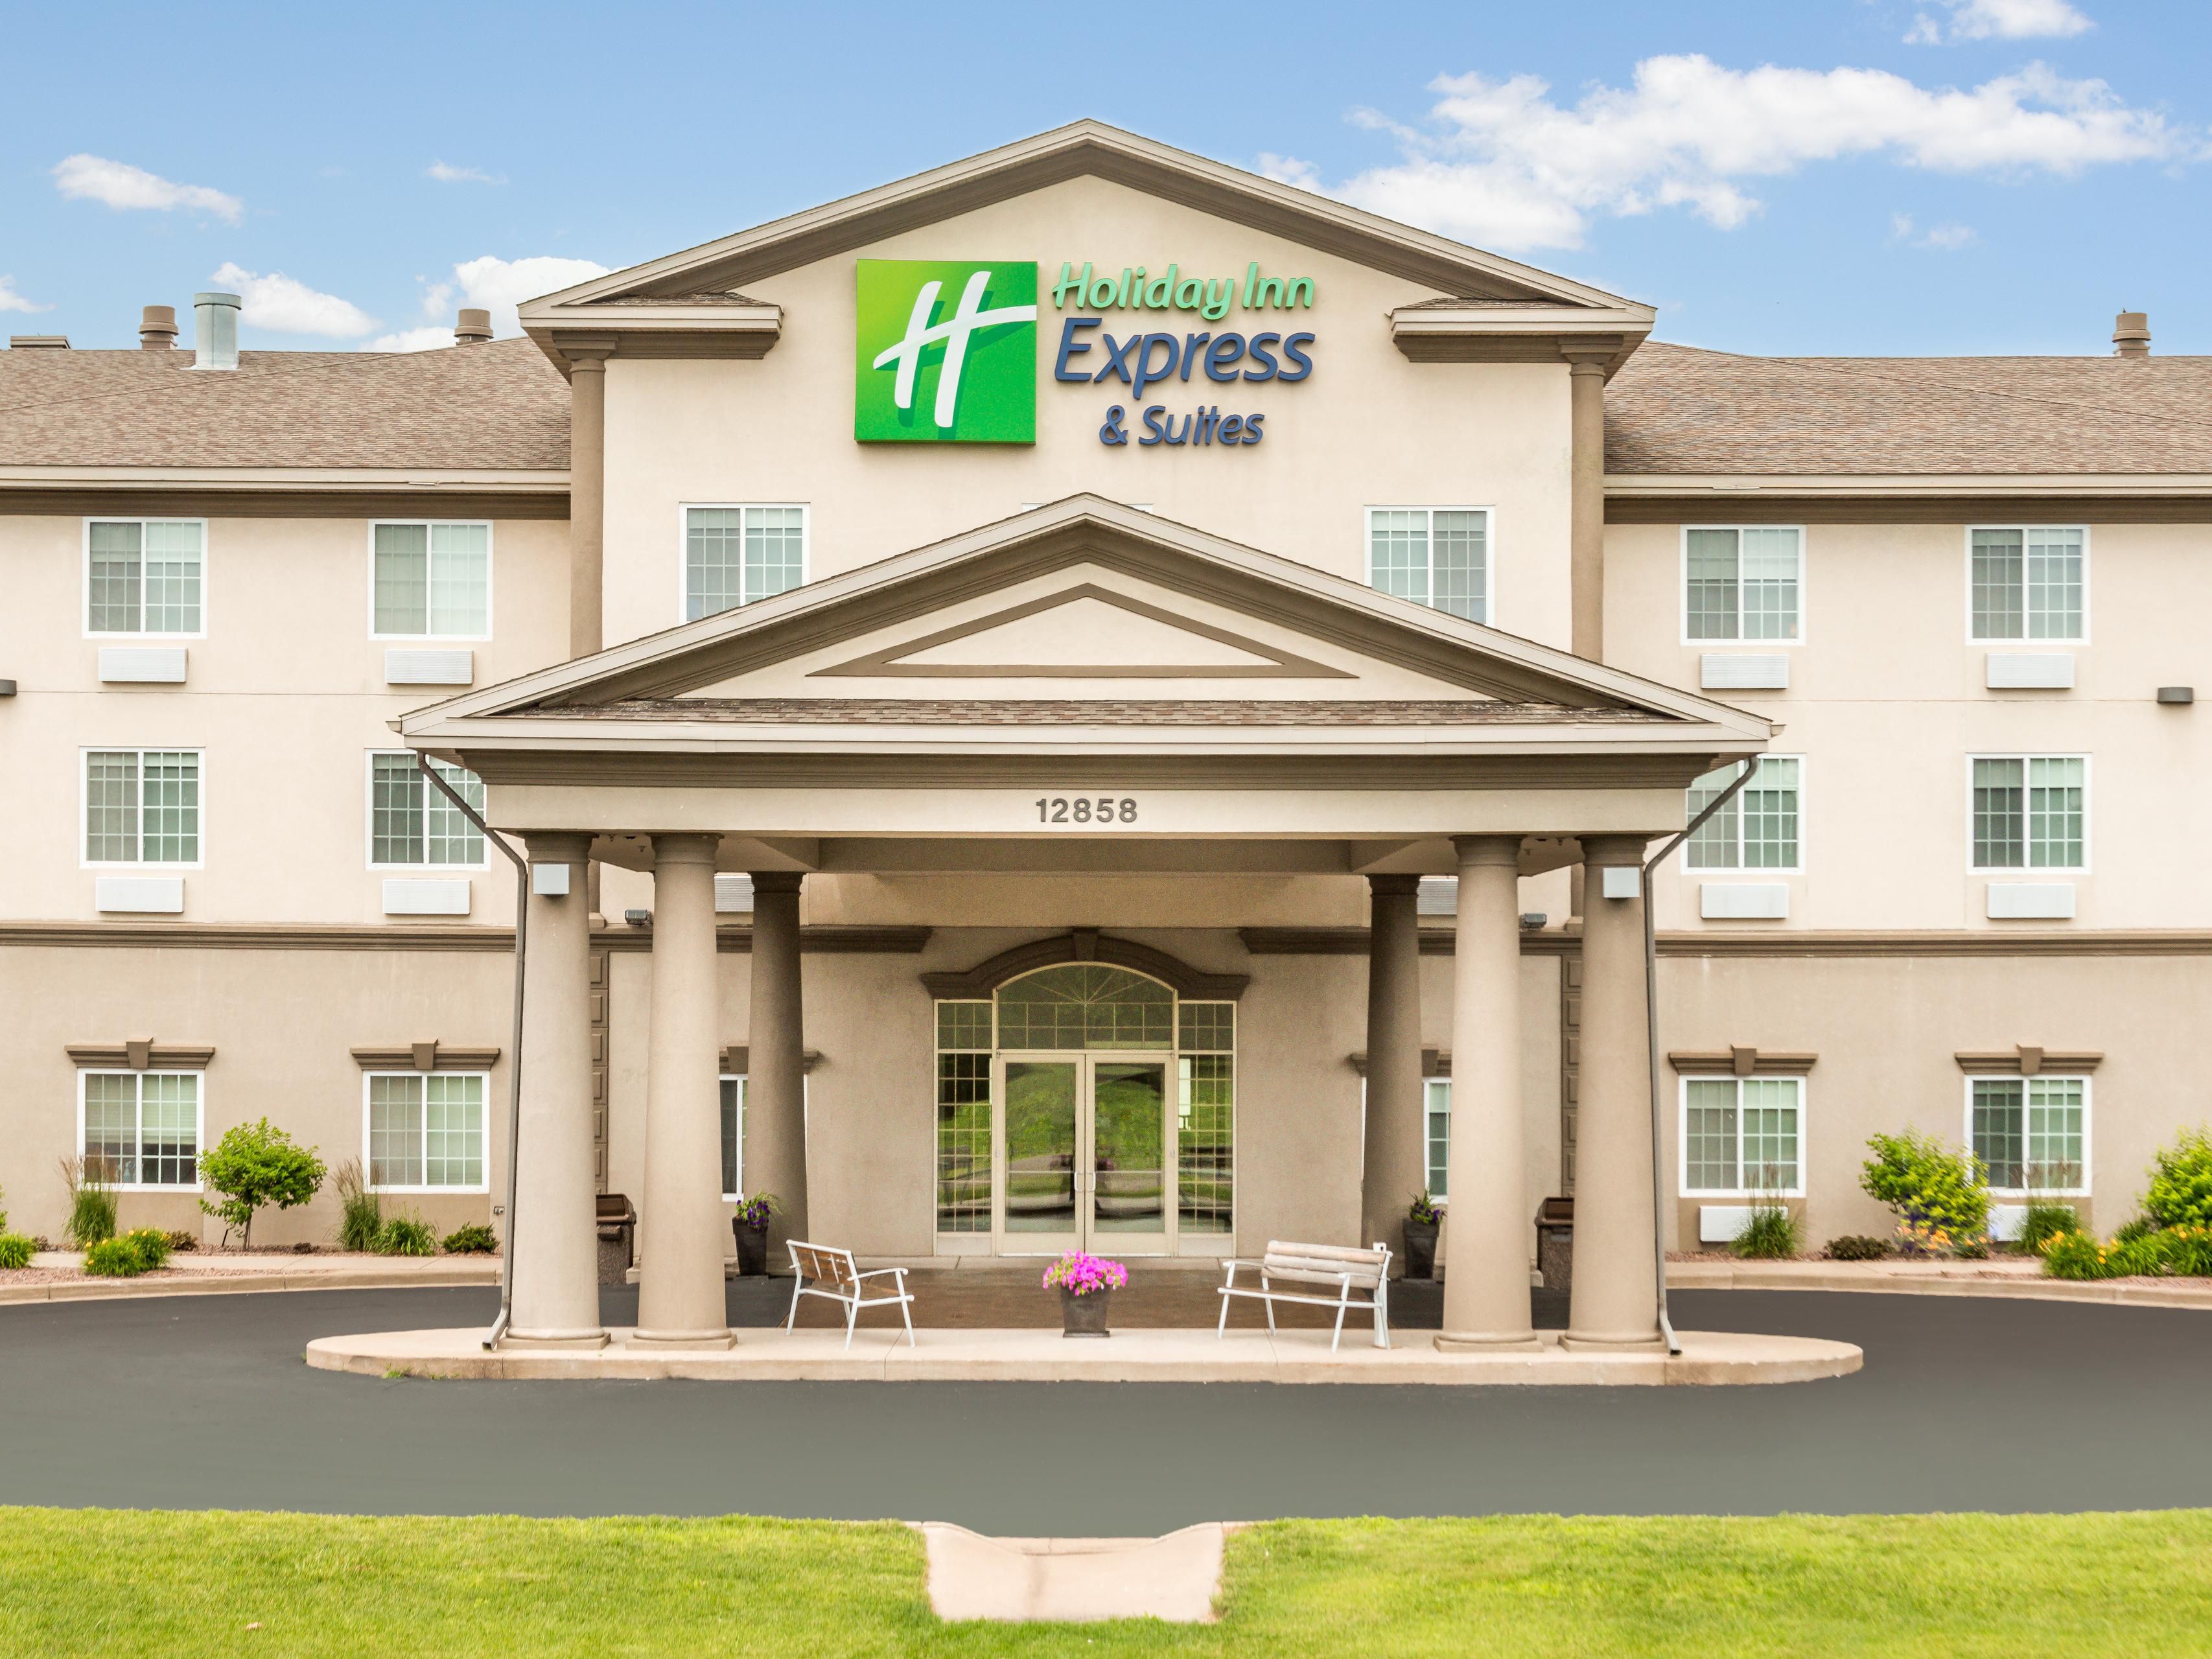 Top Hotels in Eau Claire, WI - Cancel FREE on most hotels